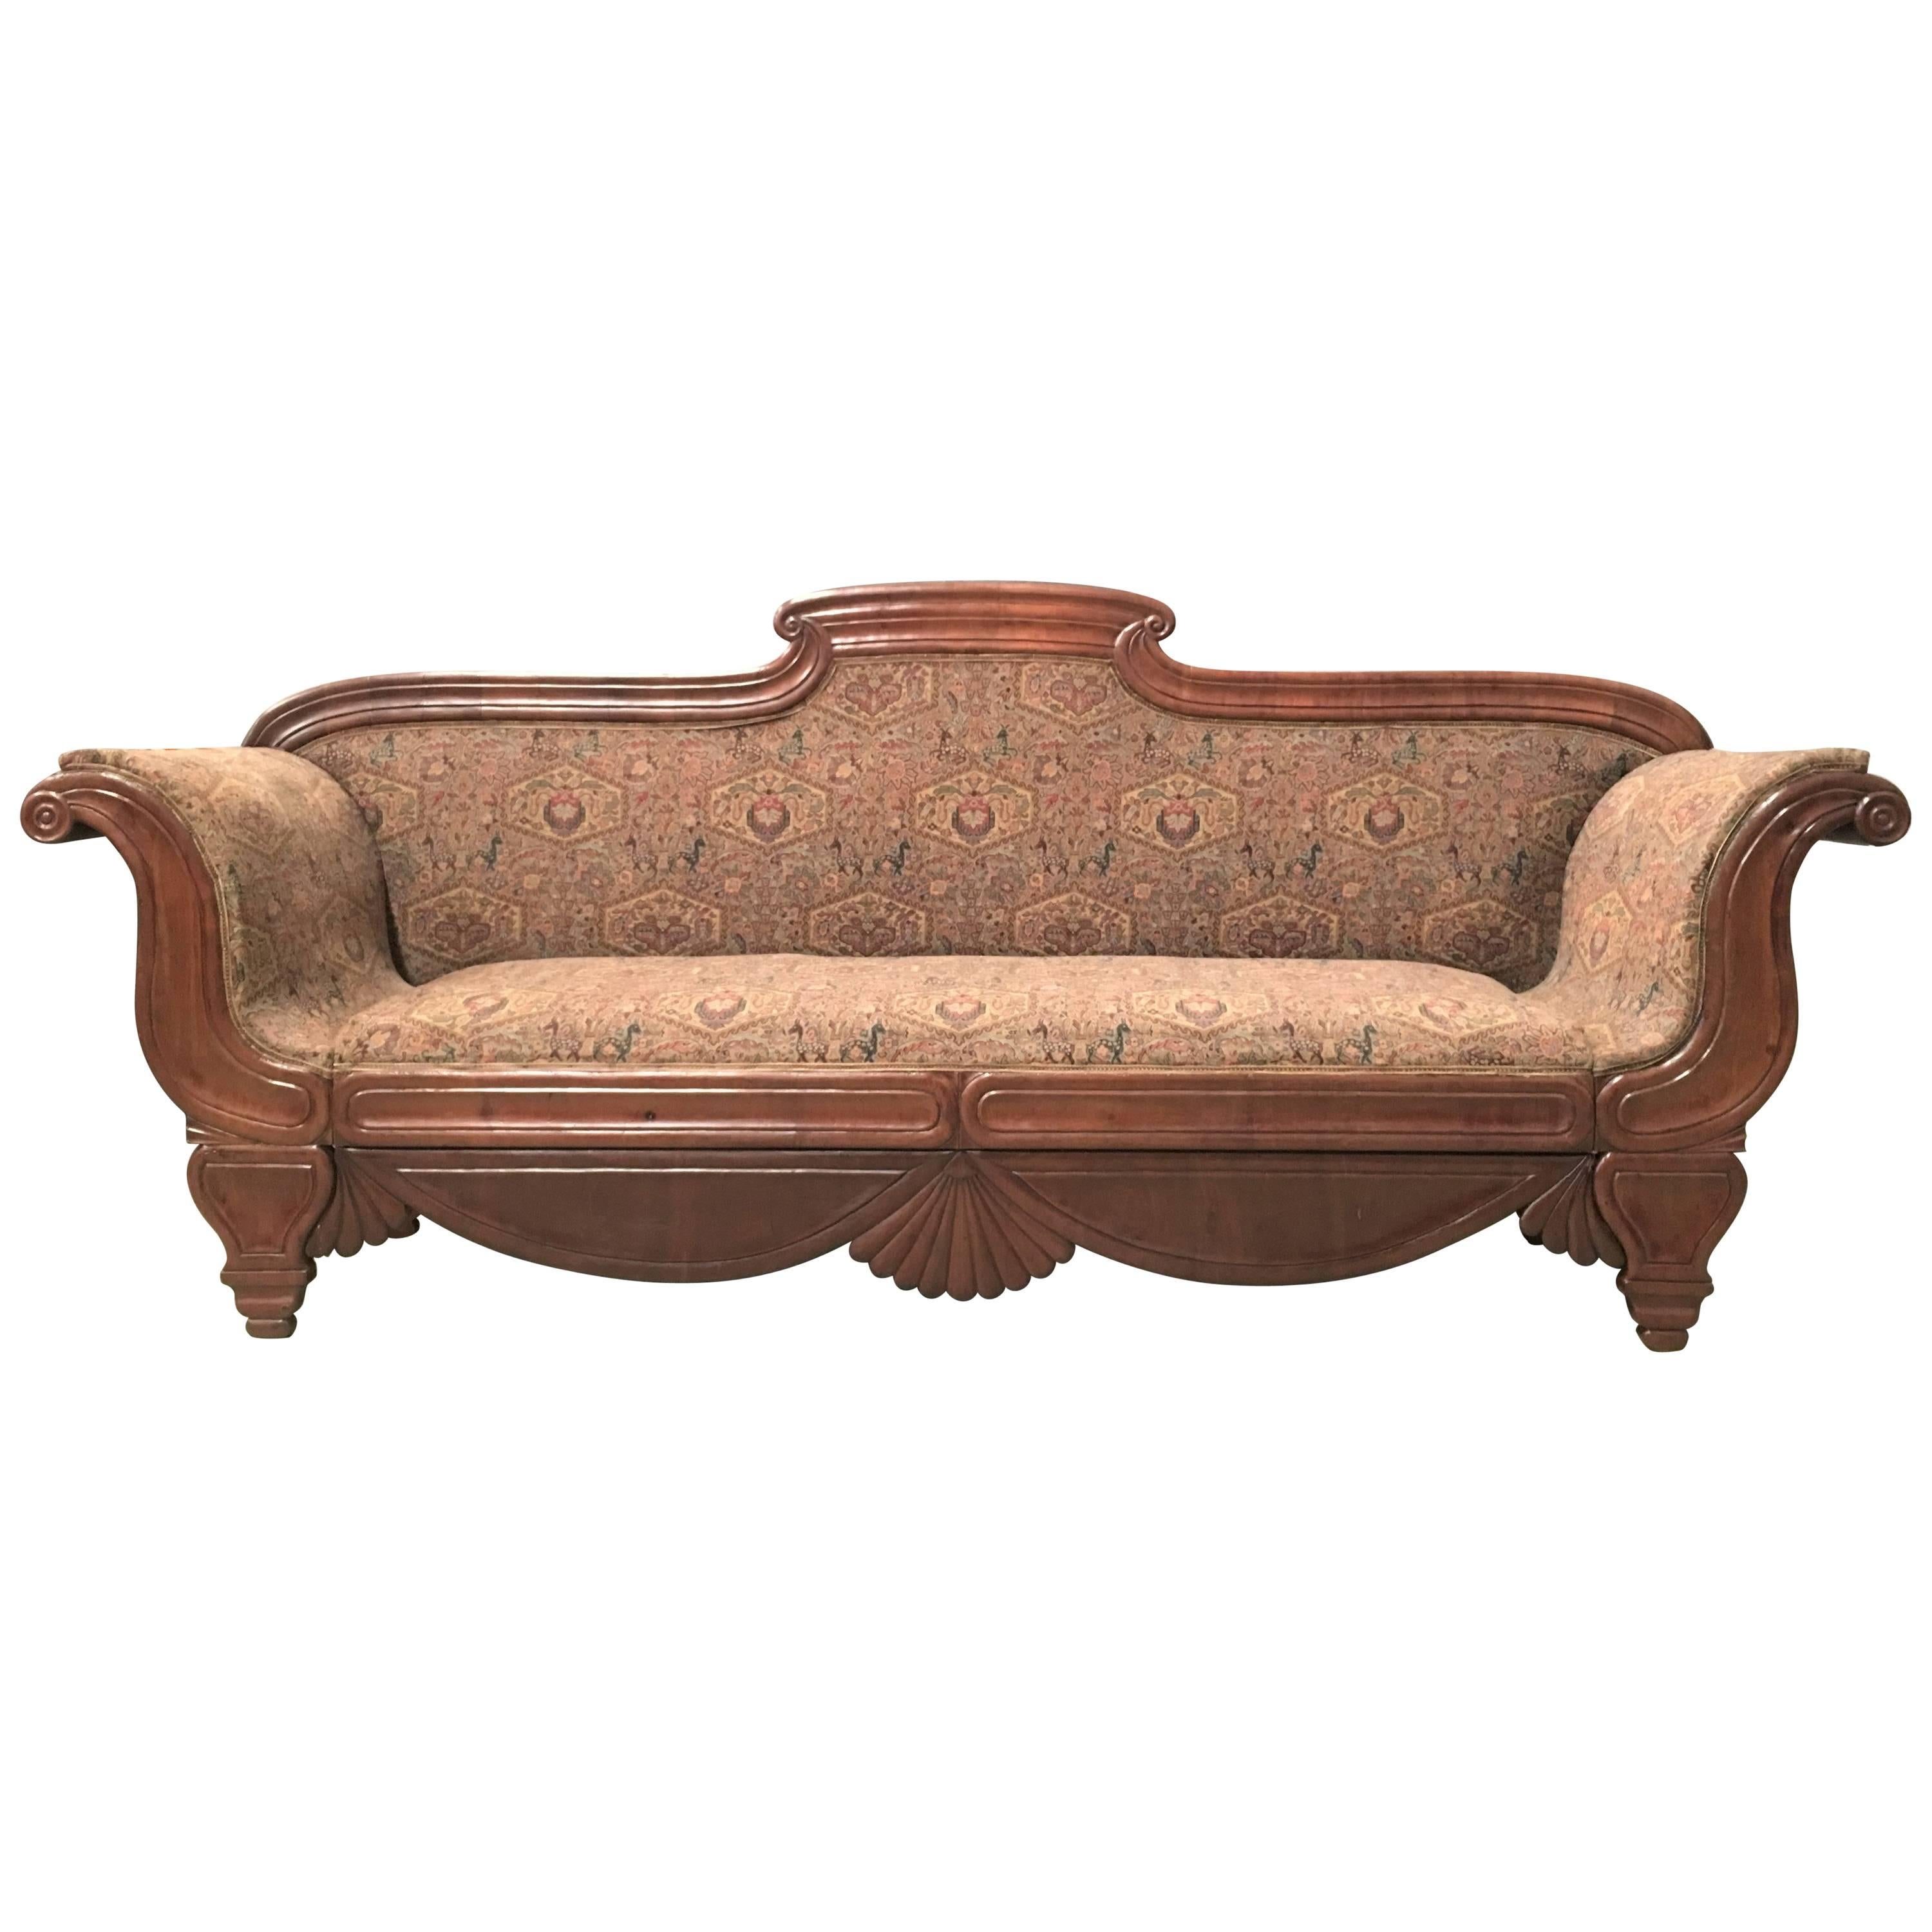 French Carved Walnut Bench, Sofa, Daybed Upholstered in Original Damask For Sale